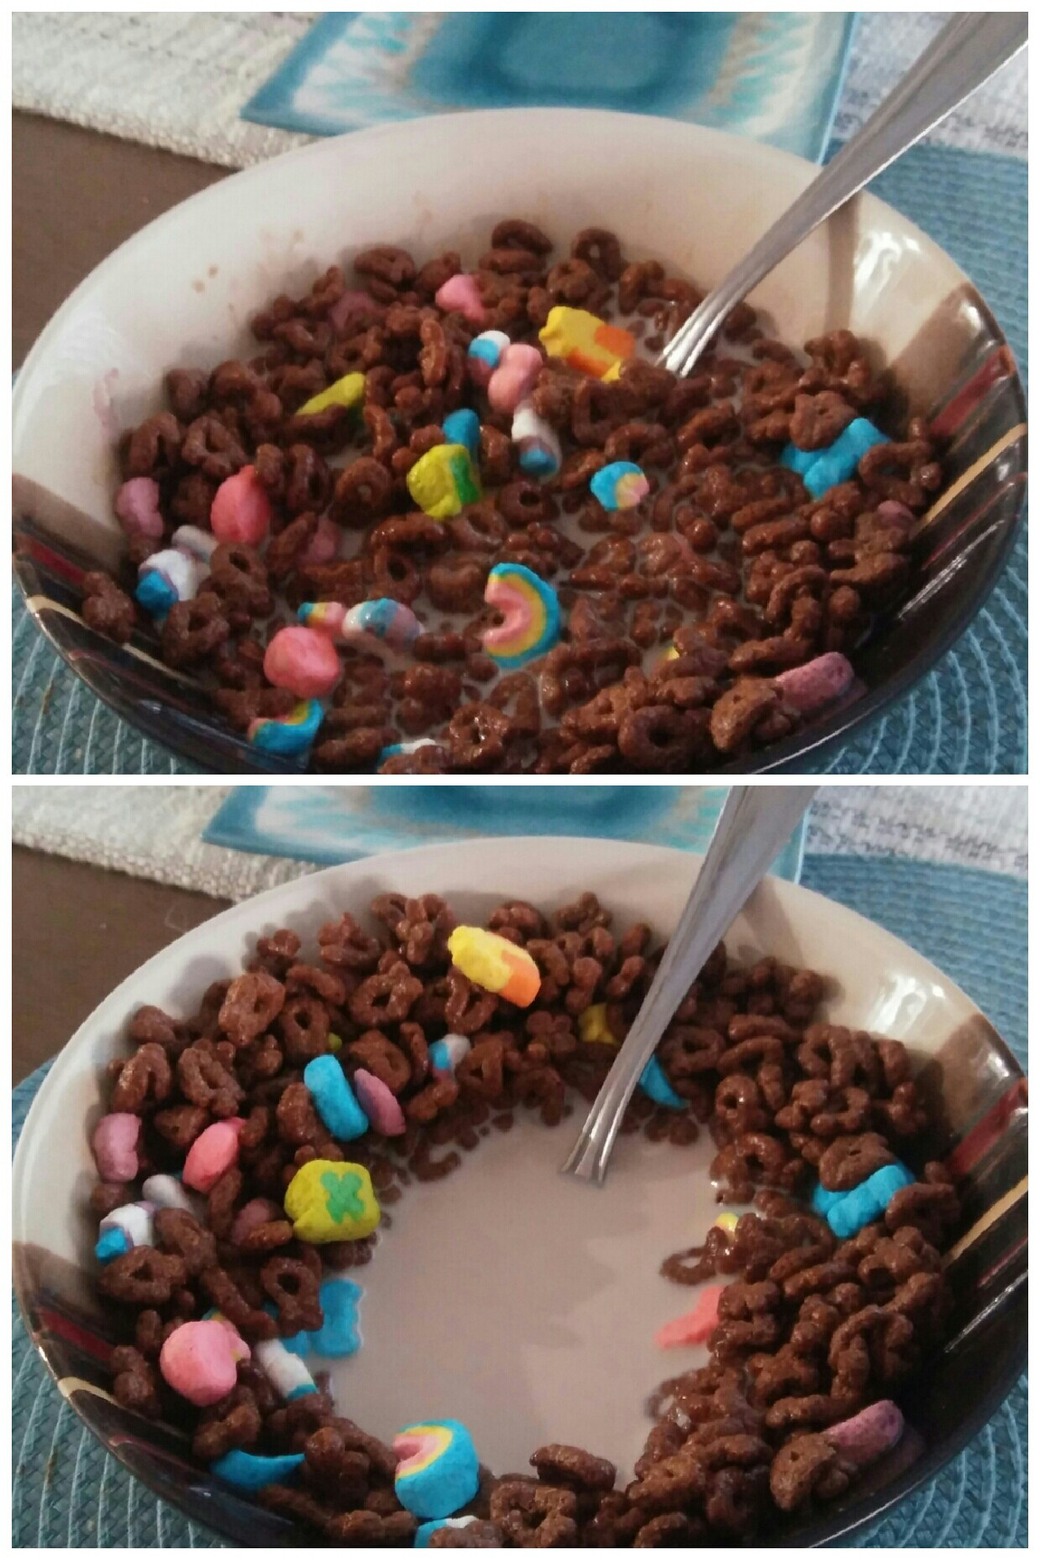 How people eat cereal vs. How I eat cereal - meme